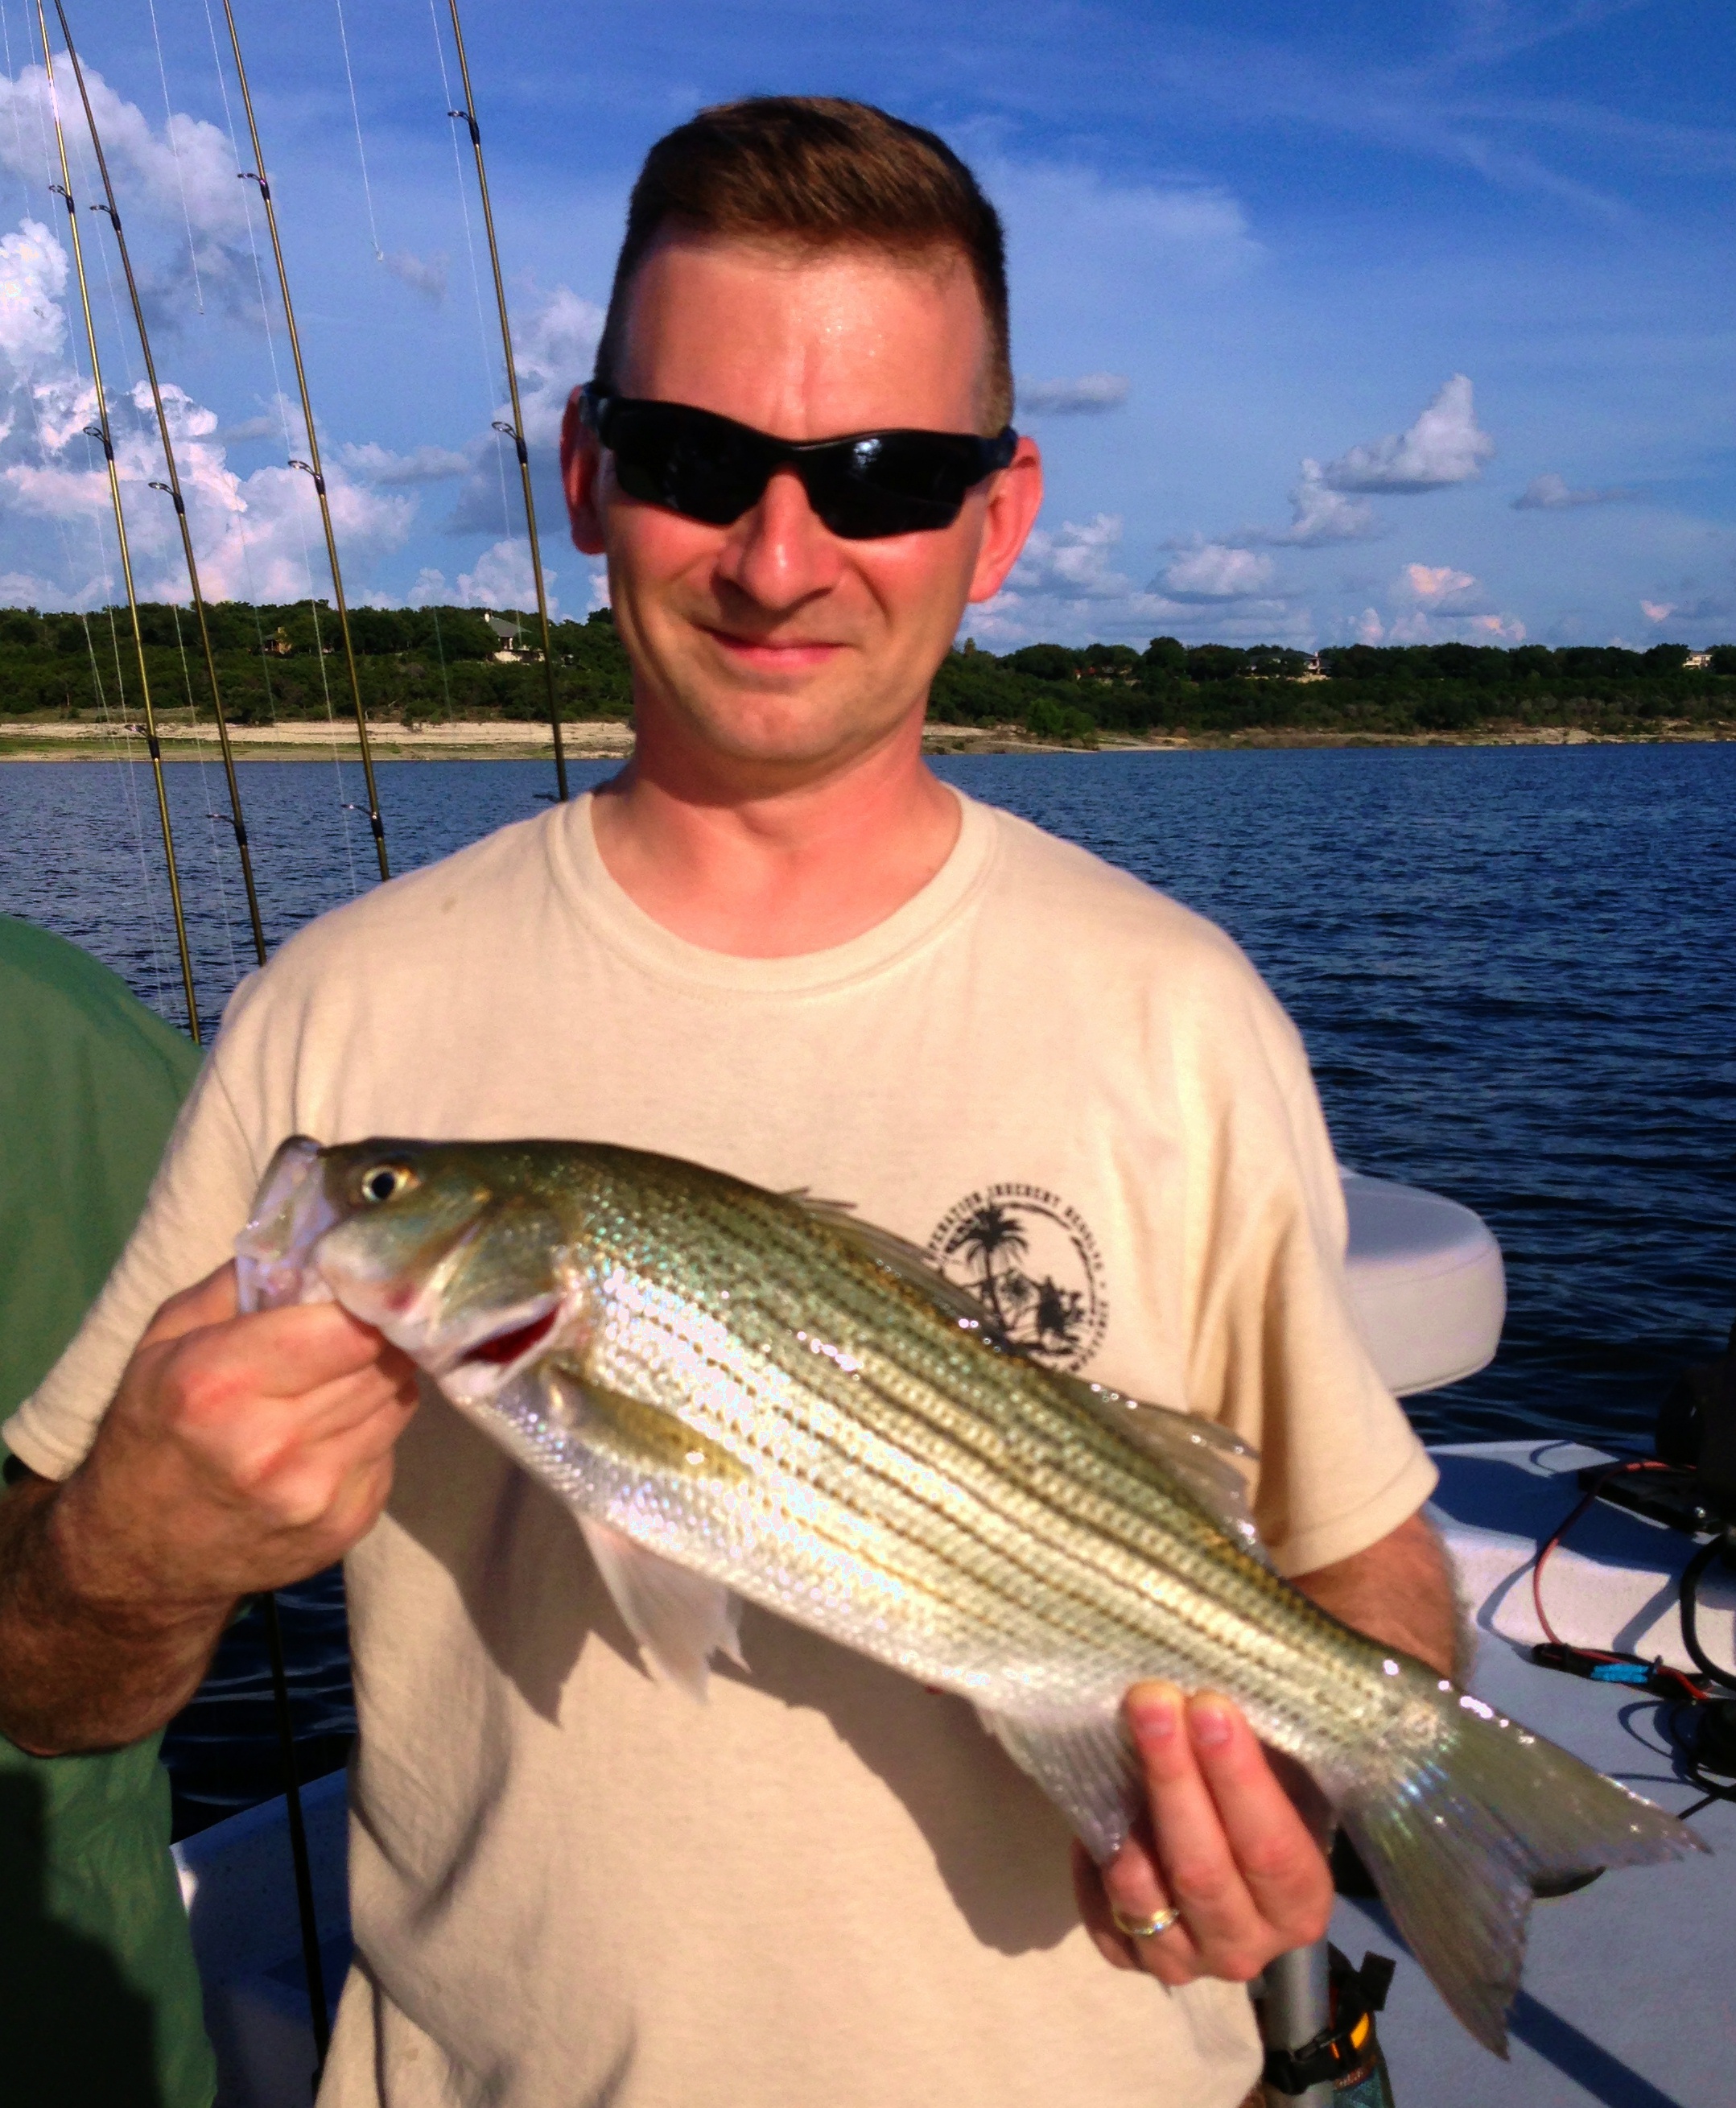 Fishing report from Wayne and Nick - Beausoleil